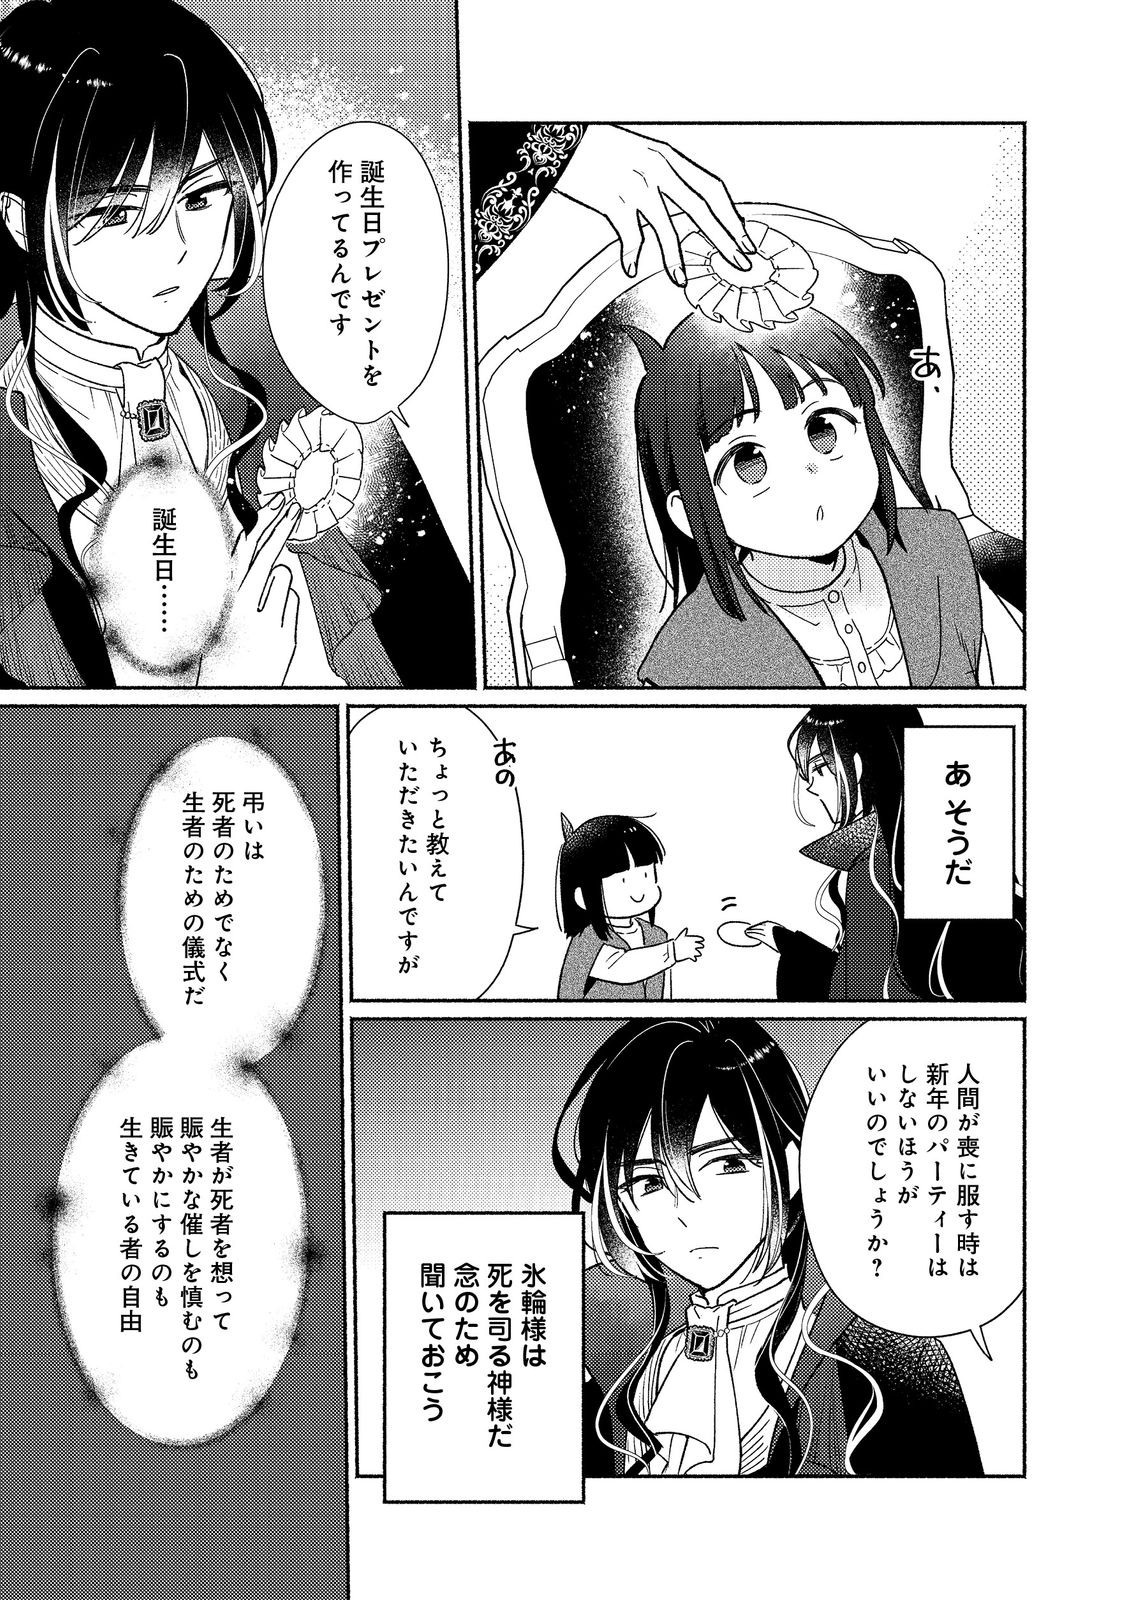 I’m the White Pig Nobleman 第24.1話 - Page 13